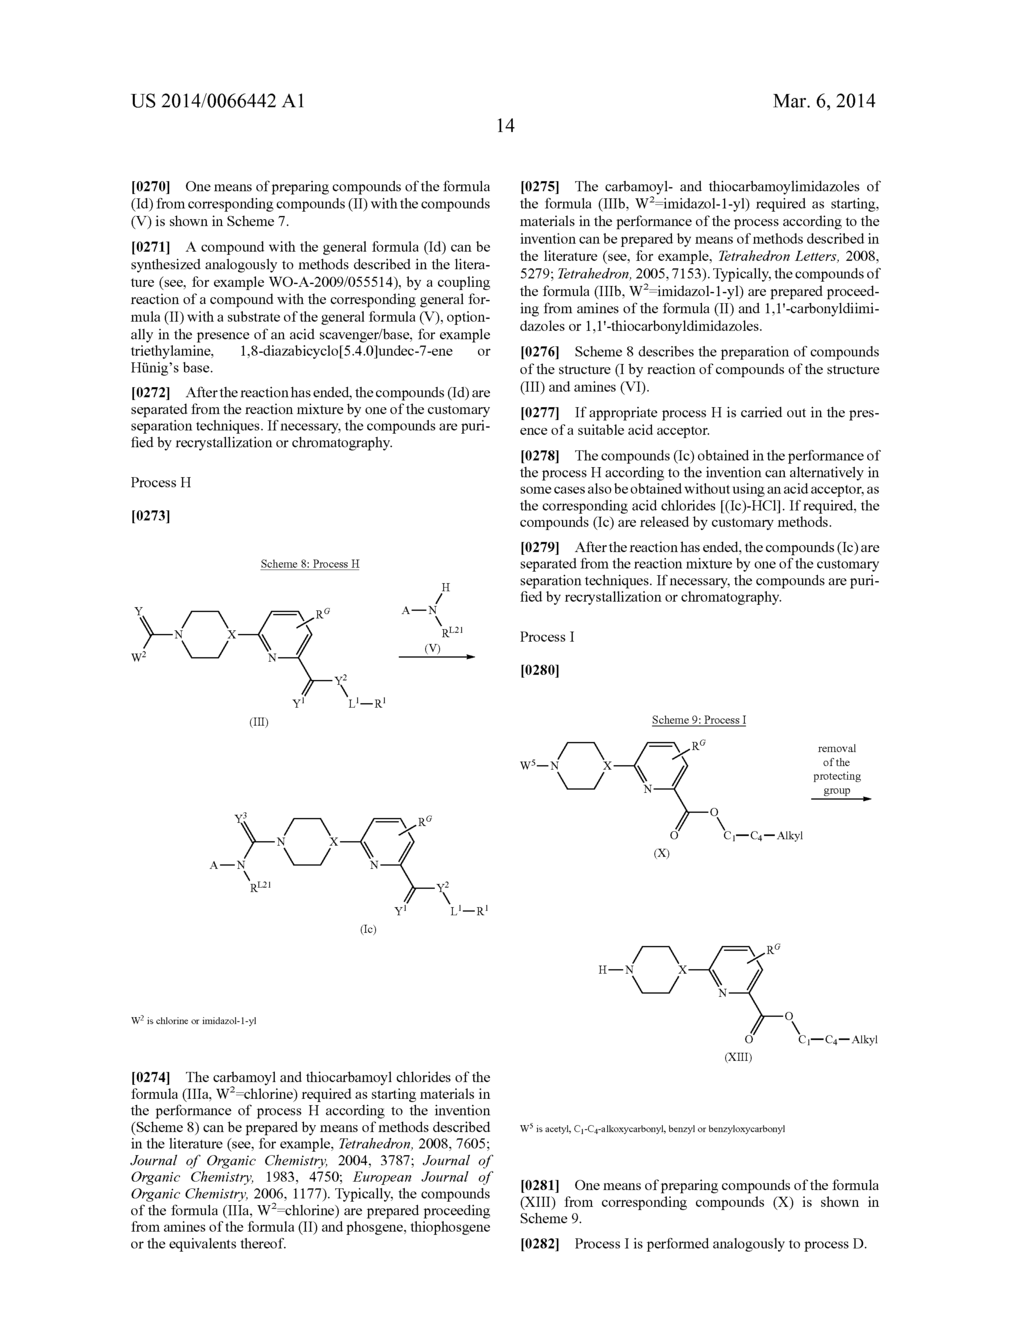 Pyridinylcarboxylic Acid Derivatives as Fungicides - diagram, schematic, and image 15